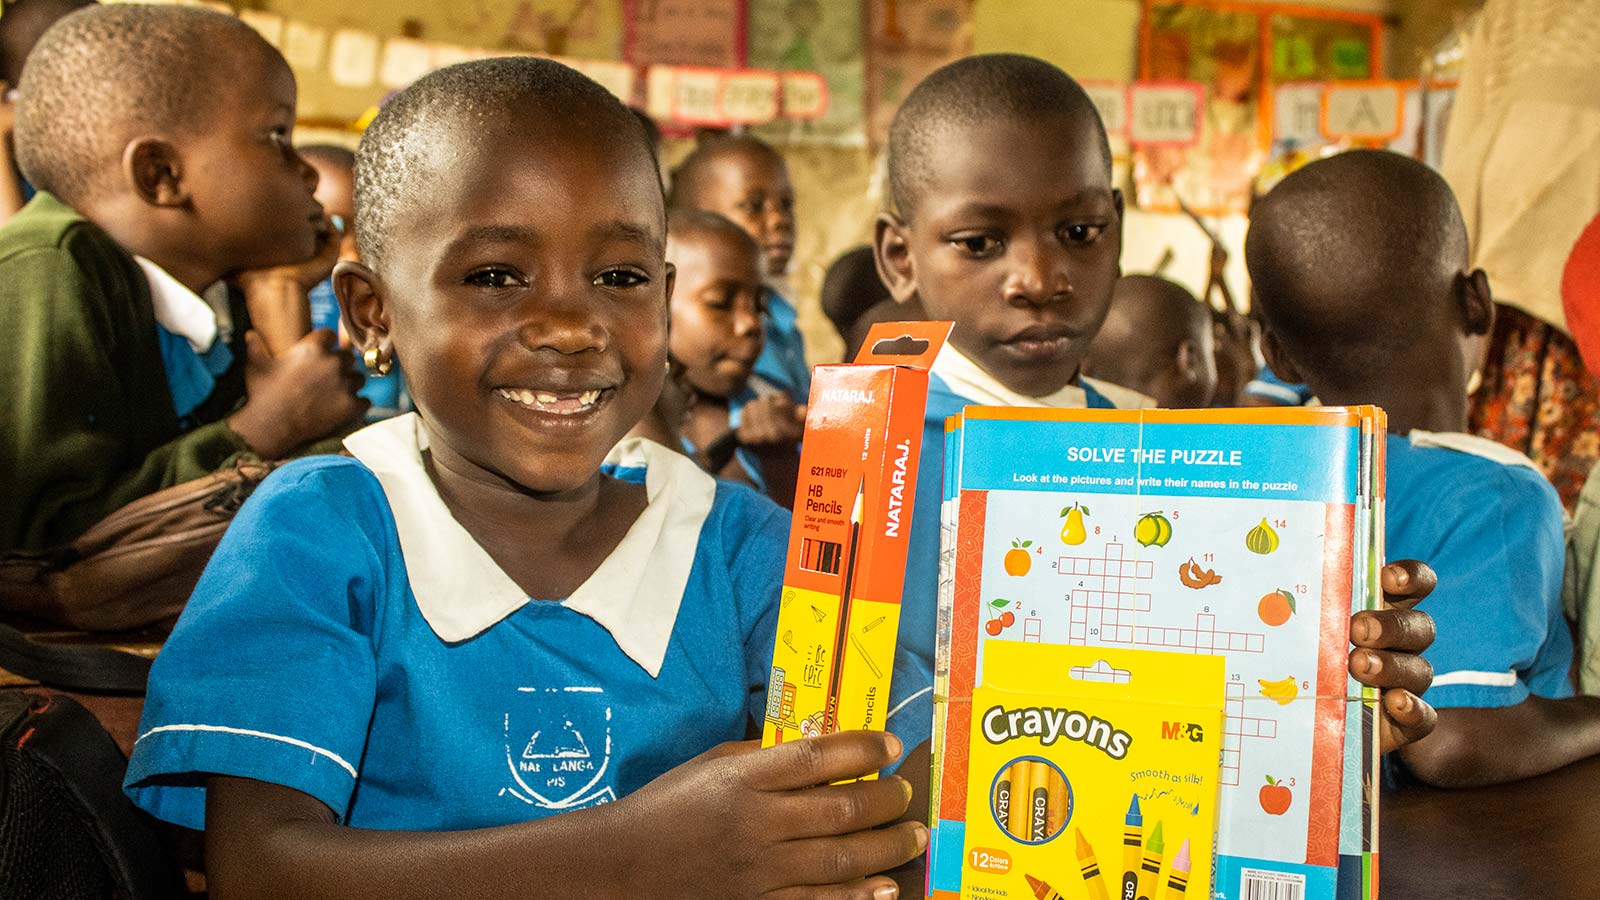 Young girl in a blue school uniform holds up new holt donated school supplies and smiles for the camera.